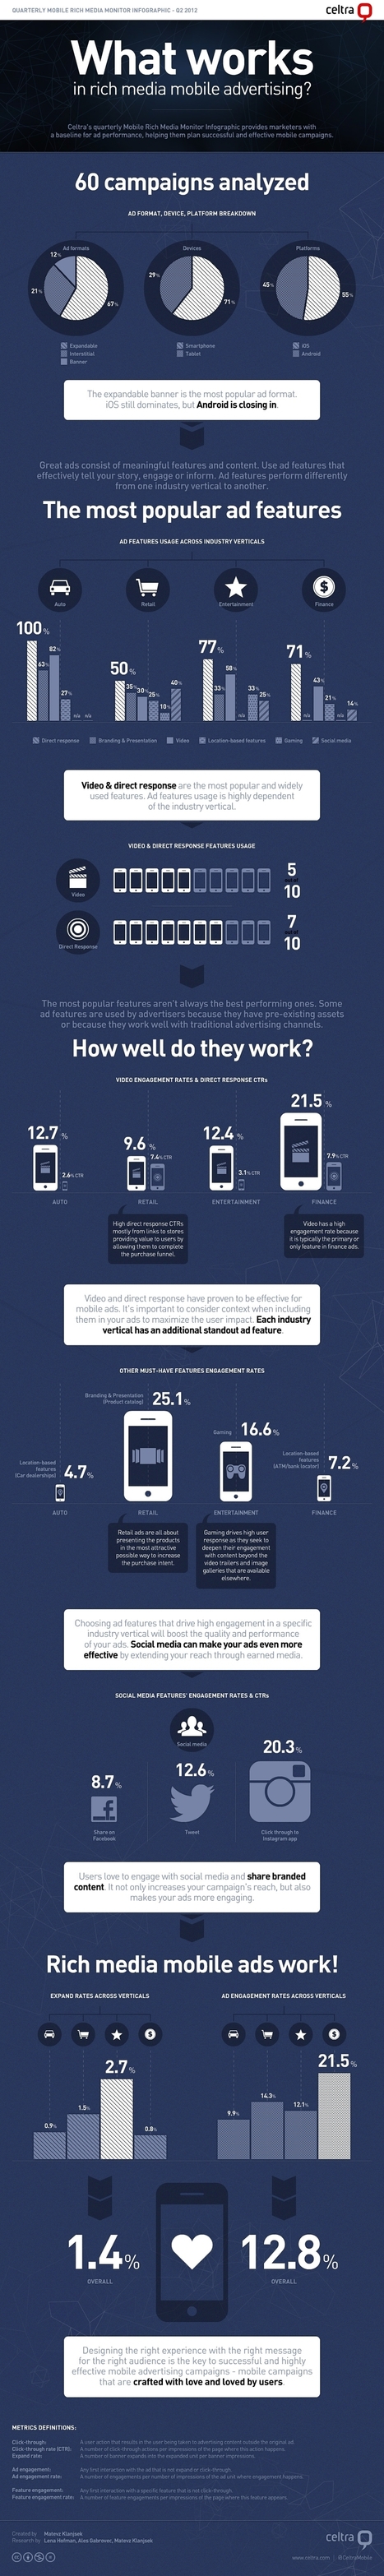 Rich Media Mobile Advertising - Here's What Works [Infographic] | Mobile Technology | Scoop.it